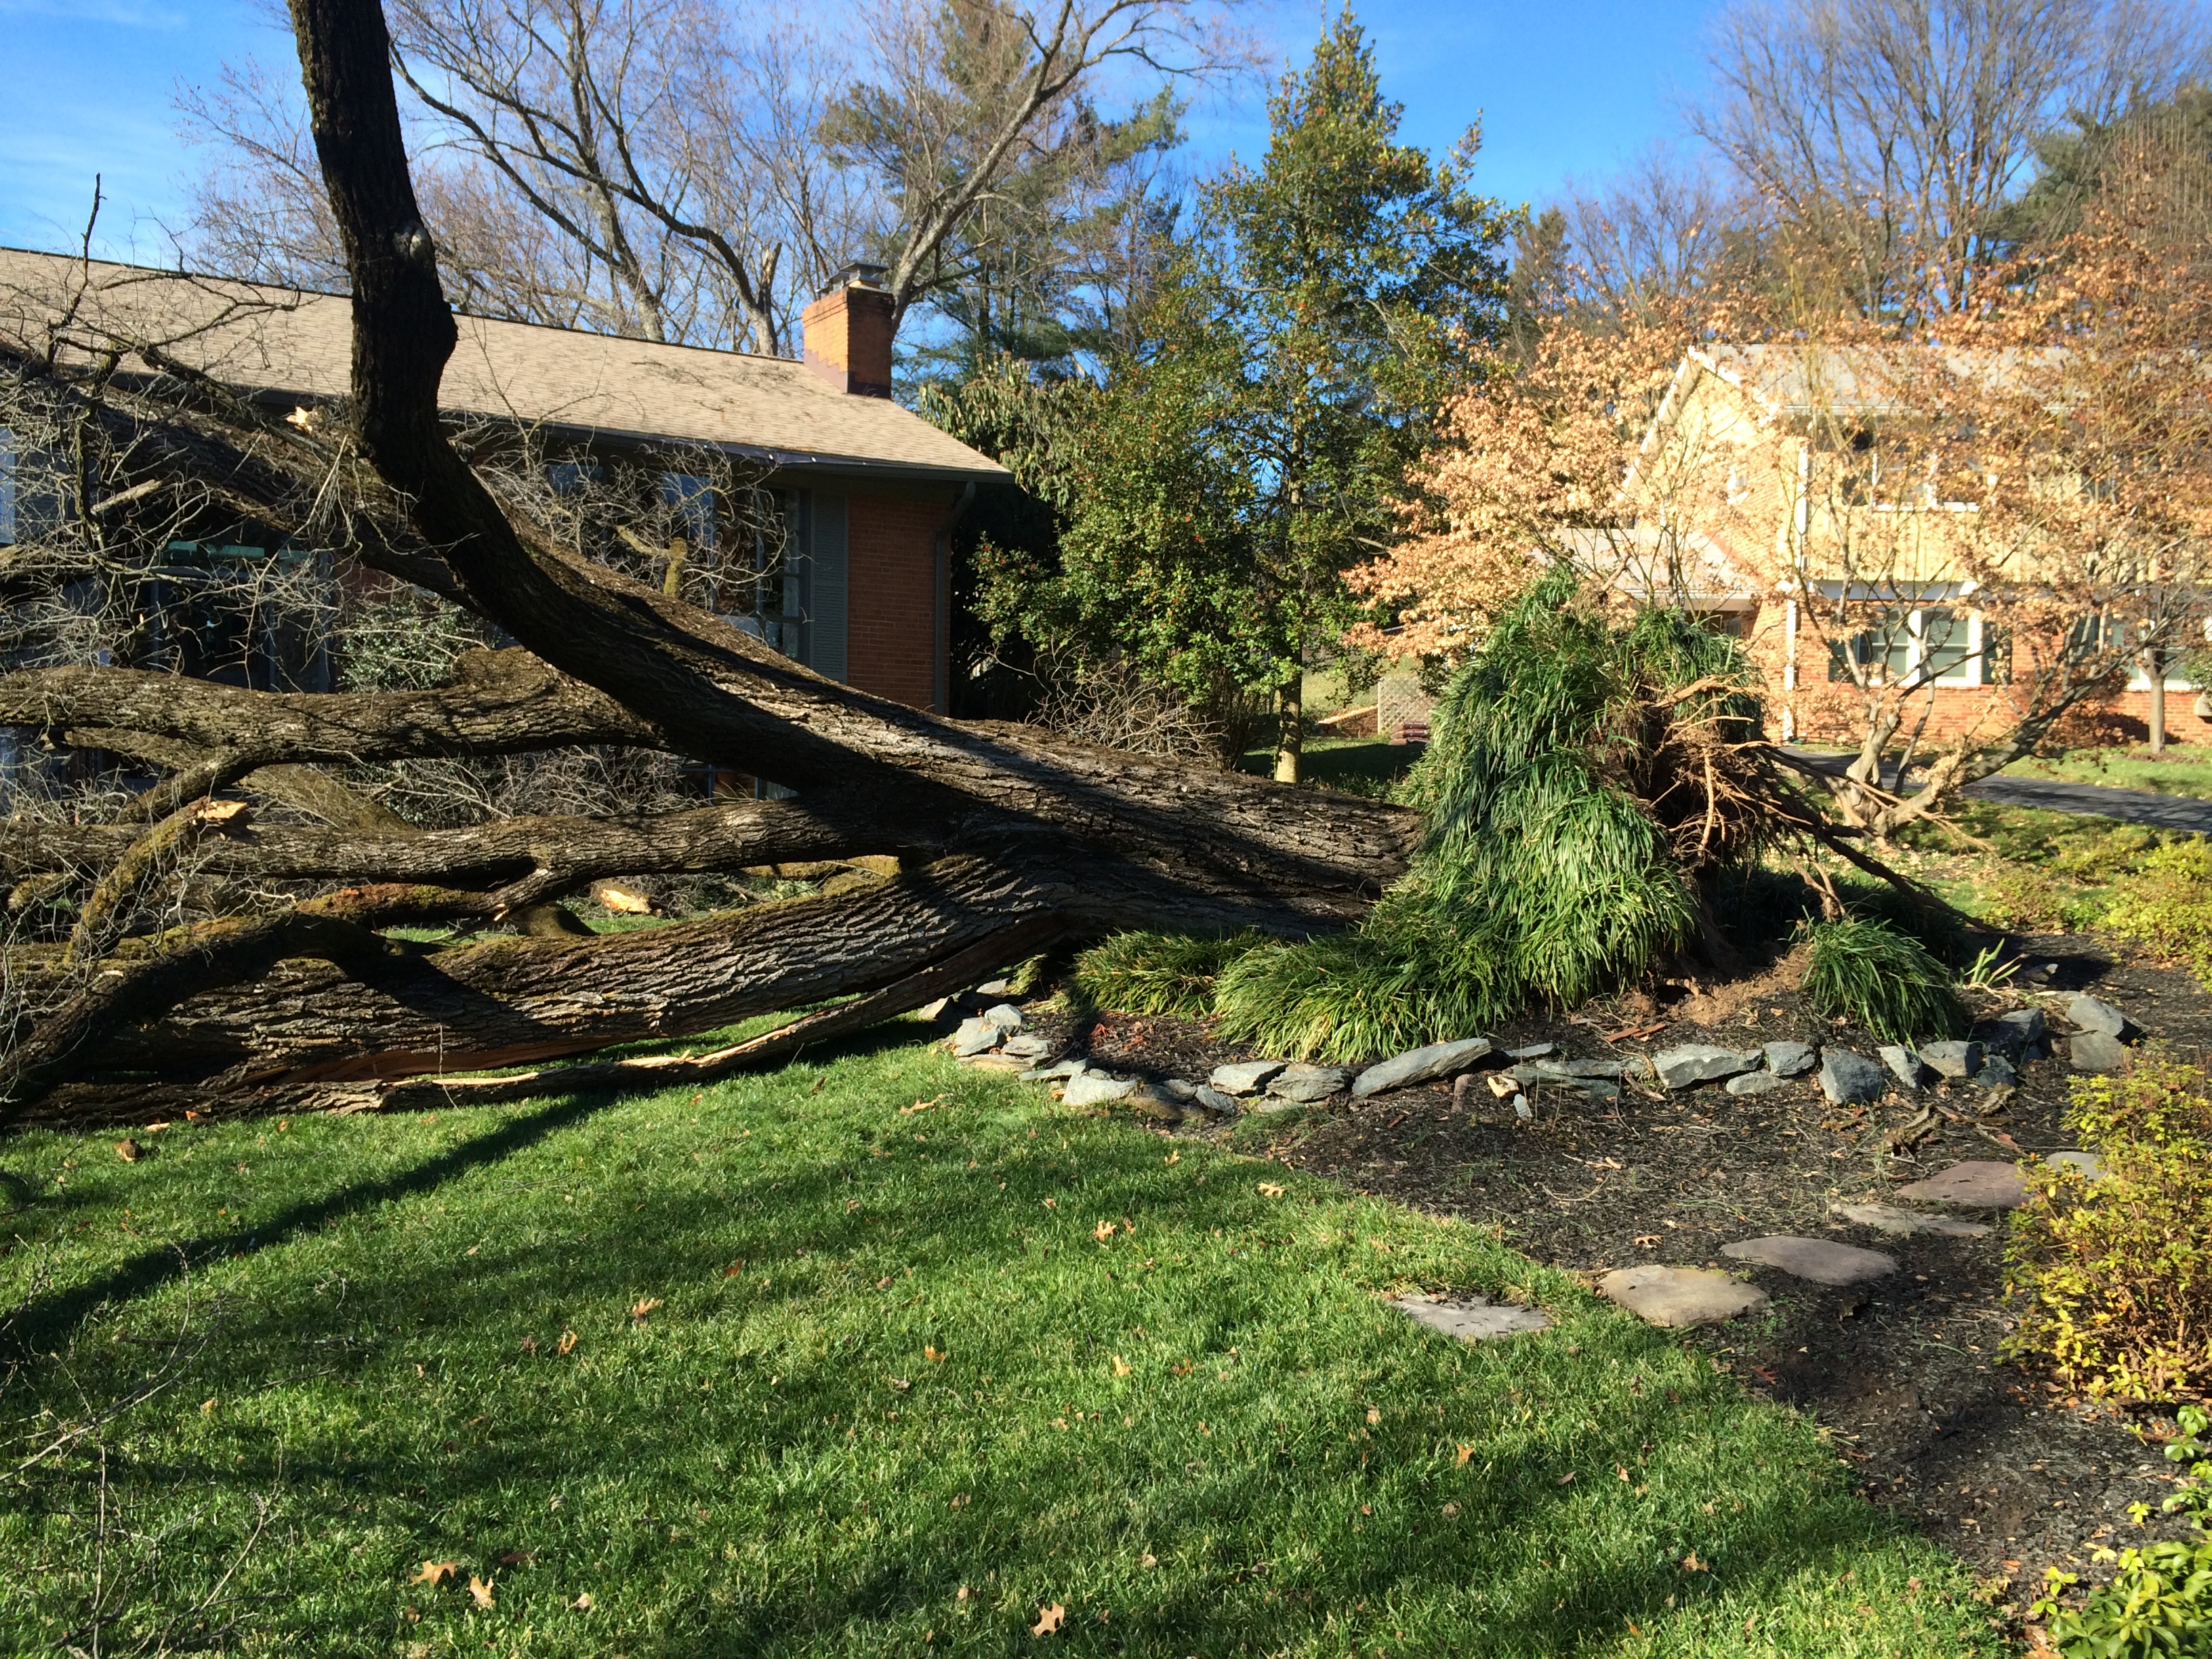 High wind damage to a tree. This tree will require removal and removal of the stump.